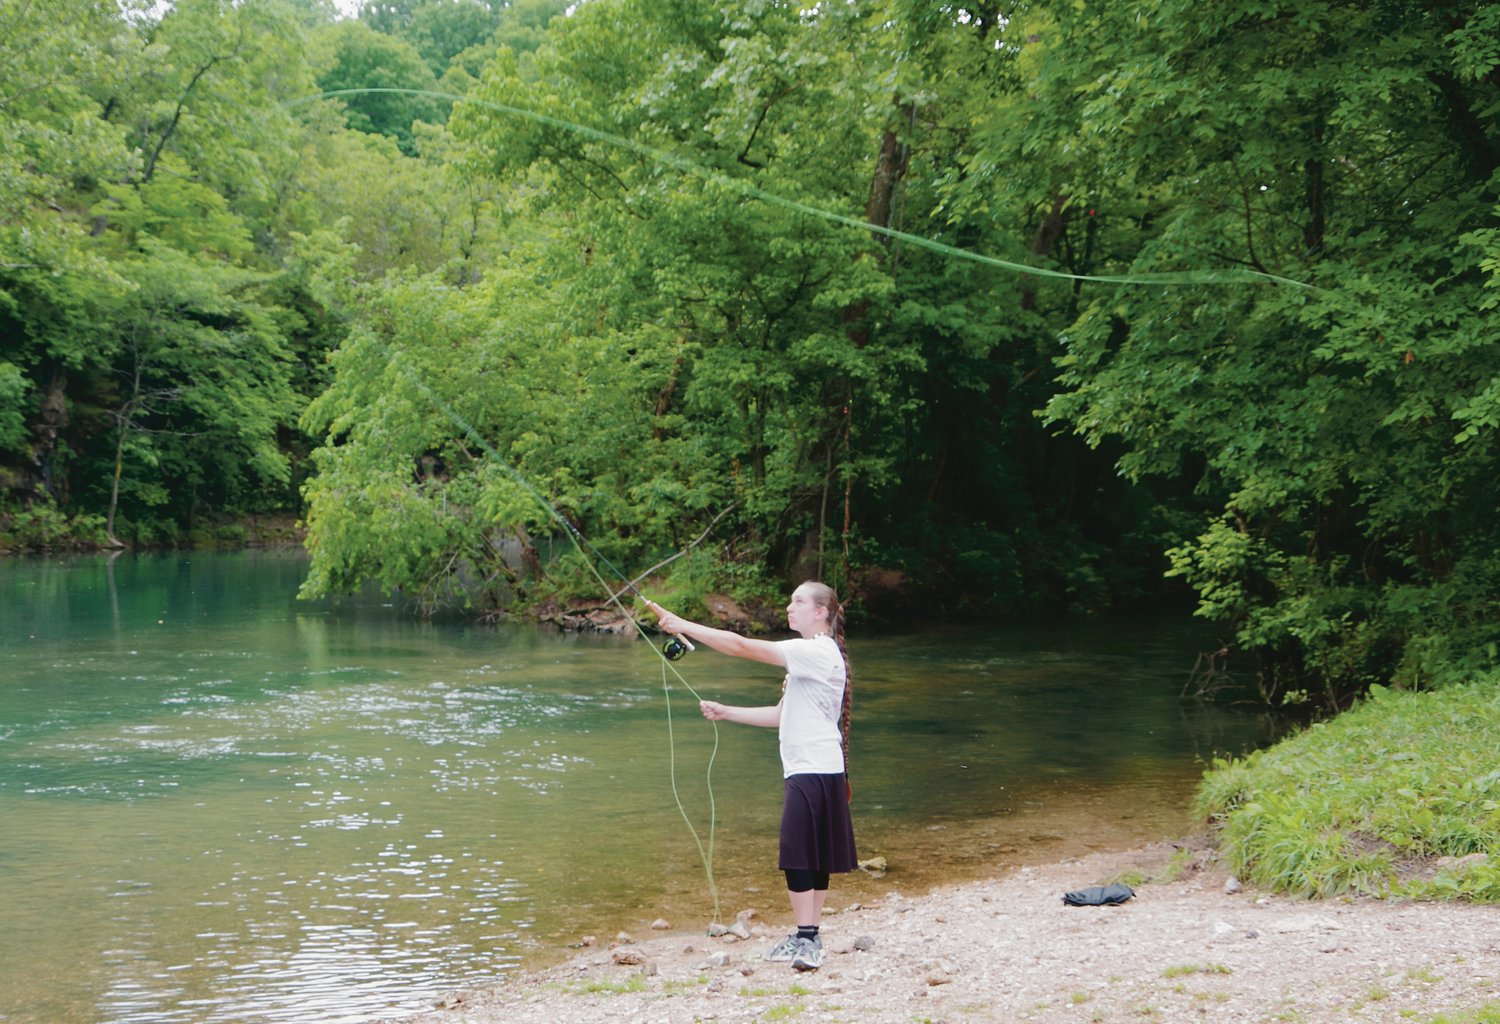 Lindsey Prince was only student fly fishing Tuesday morning. She learned how in the class about three years ago and enjoys it and the Explorer Camp at Bennett's other outdoor activities.